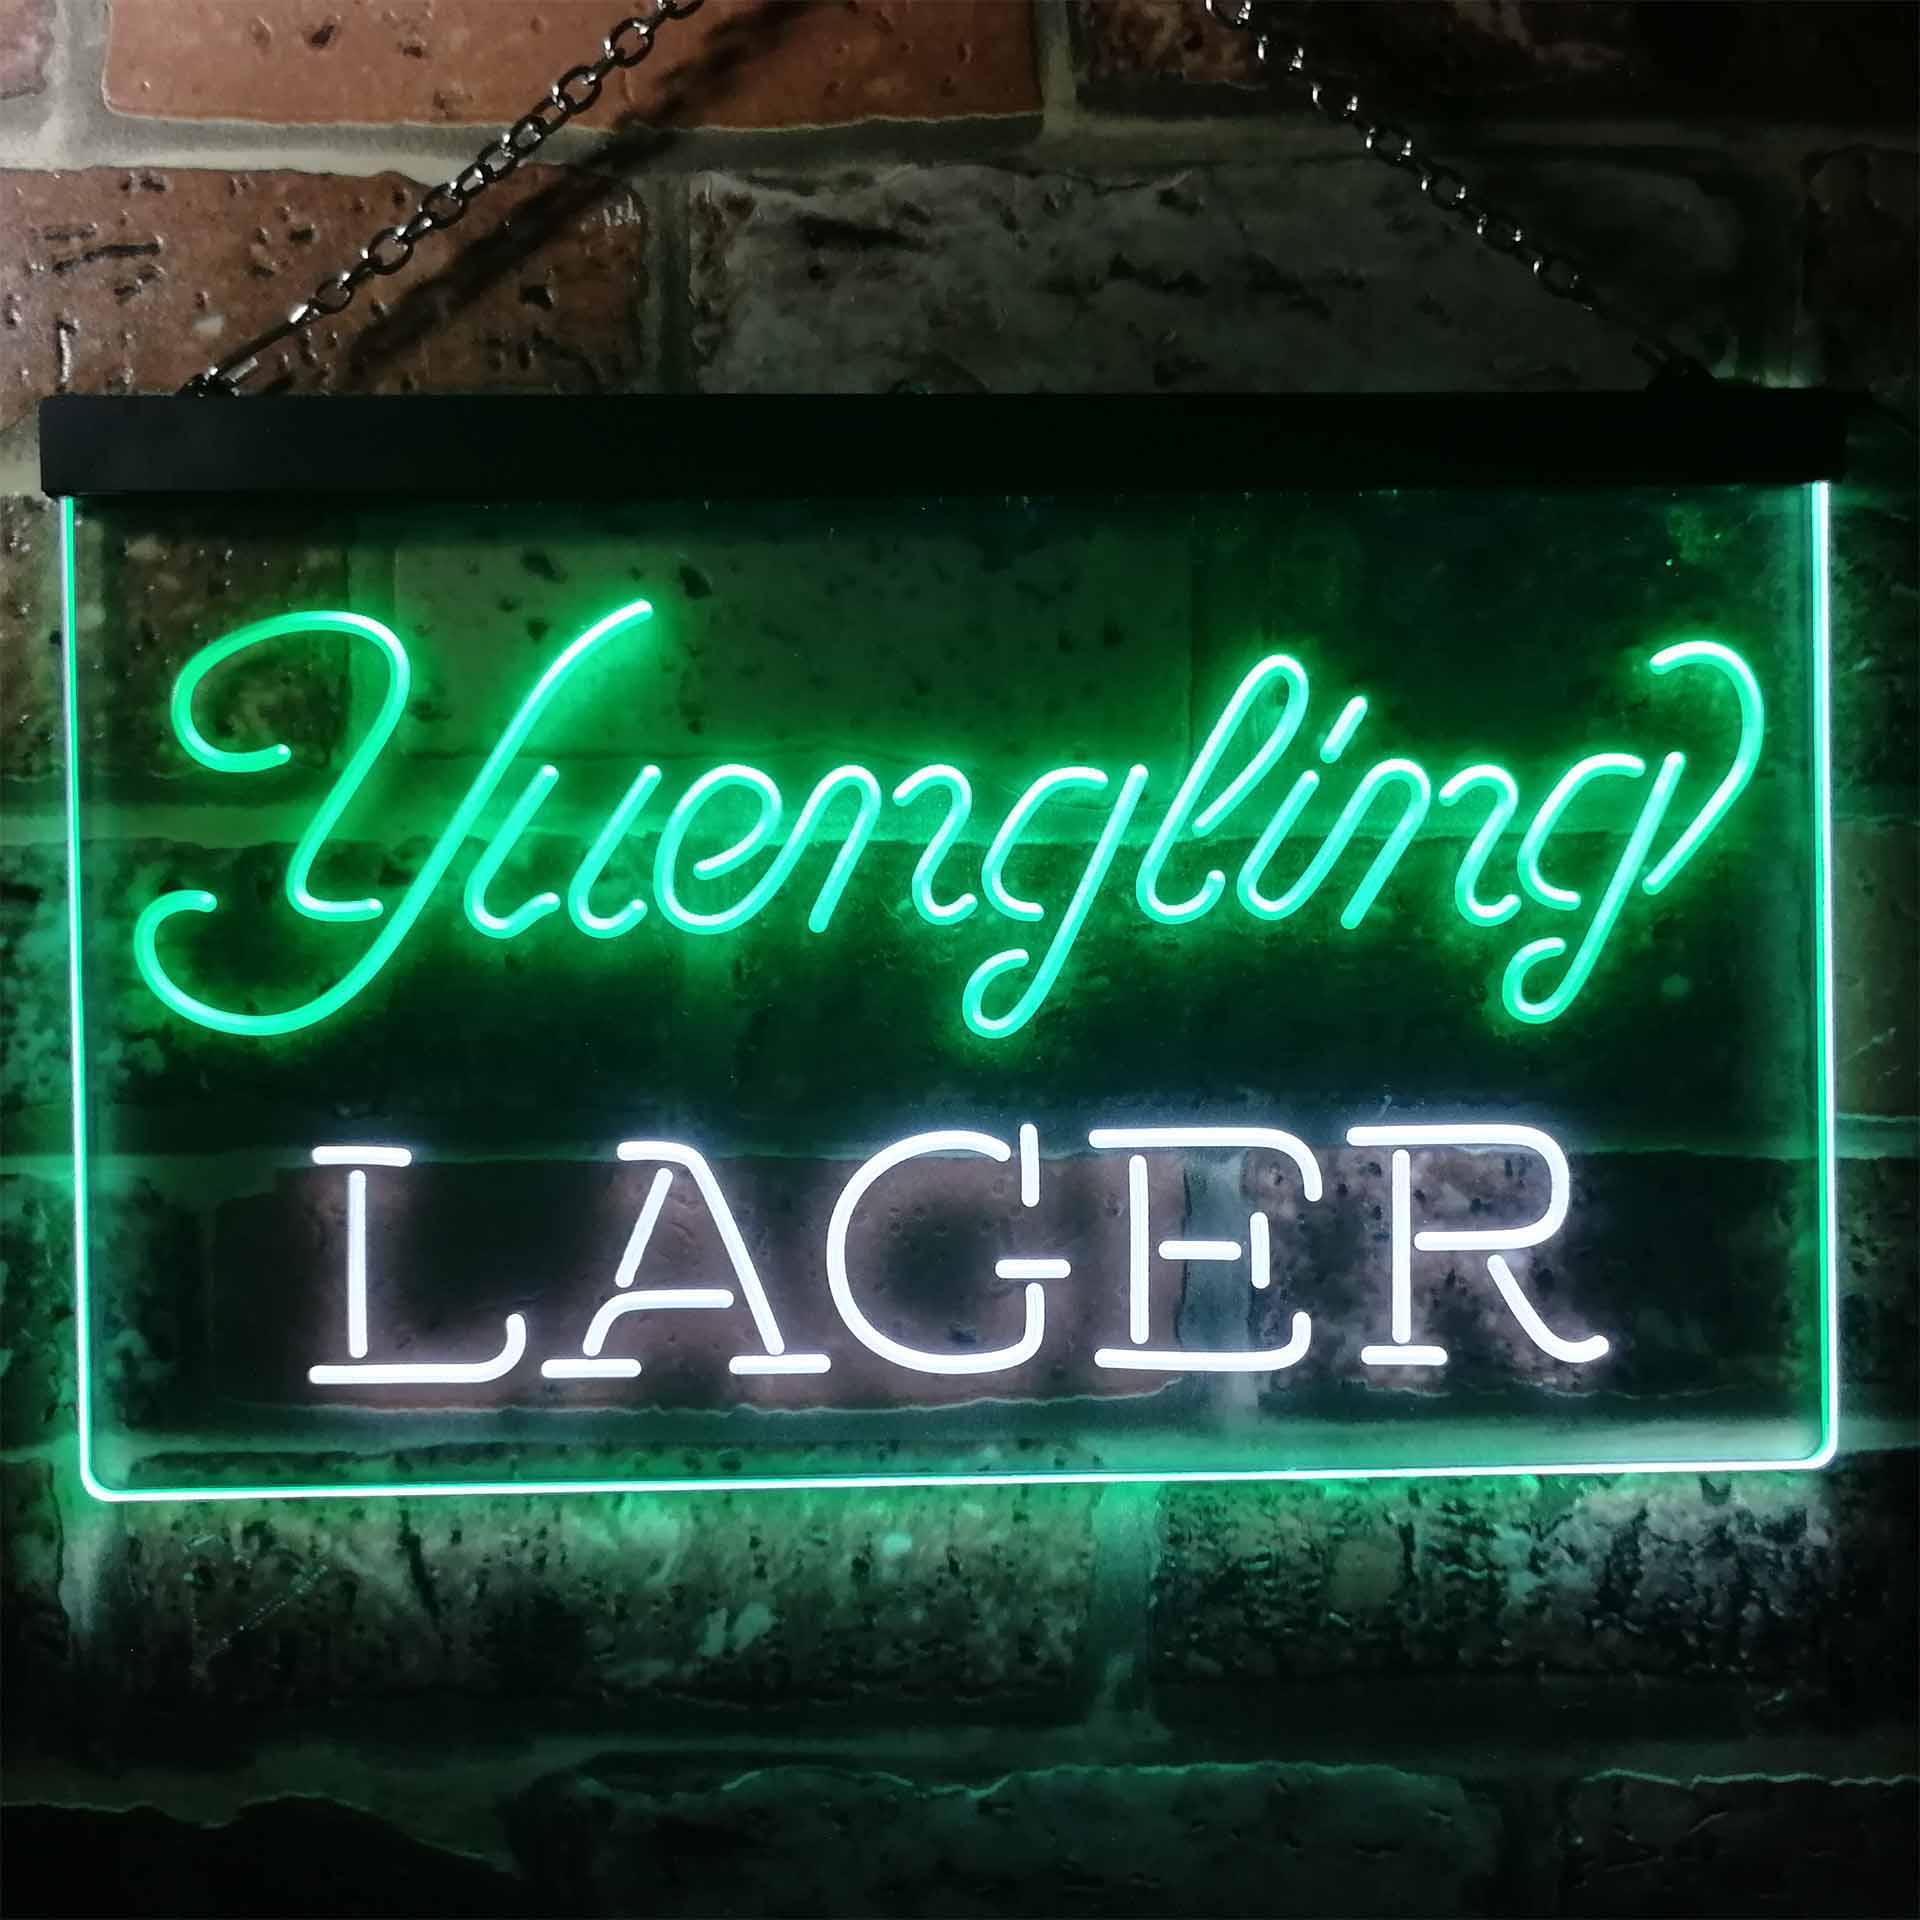 Yuengling Larger Beer Neon LED Sign